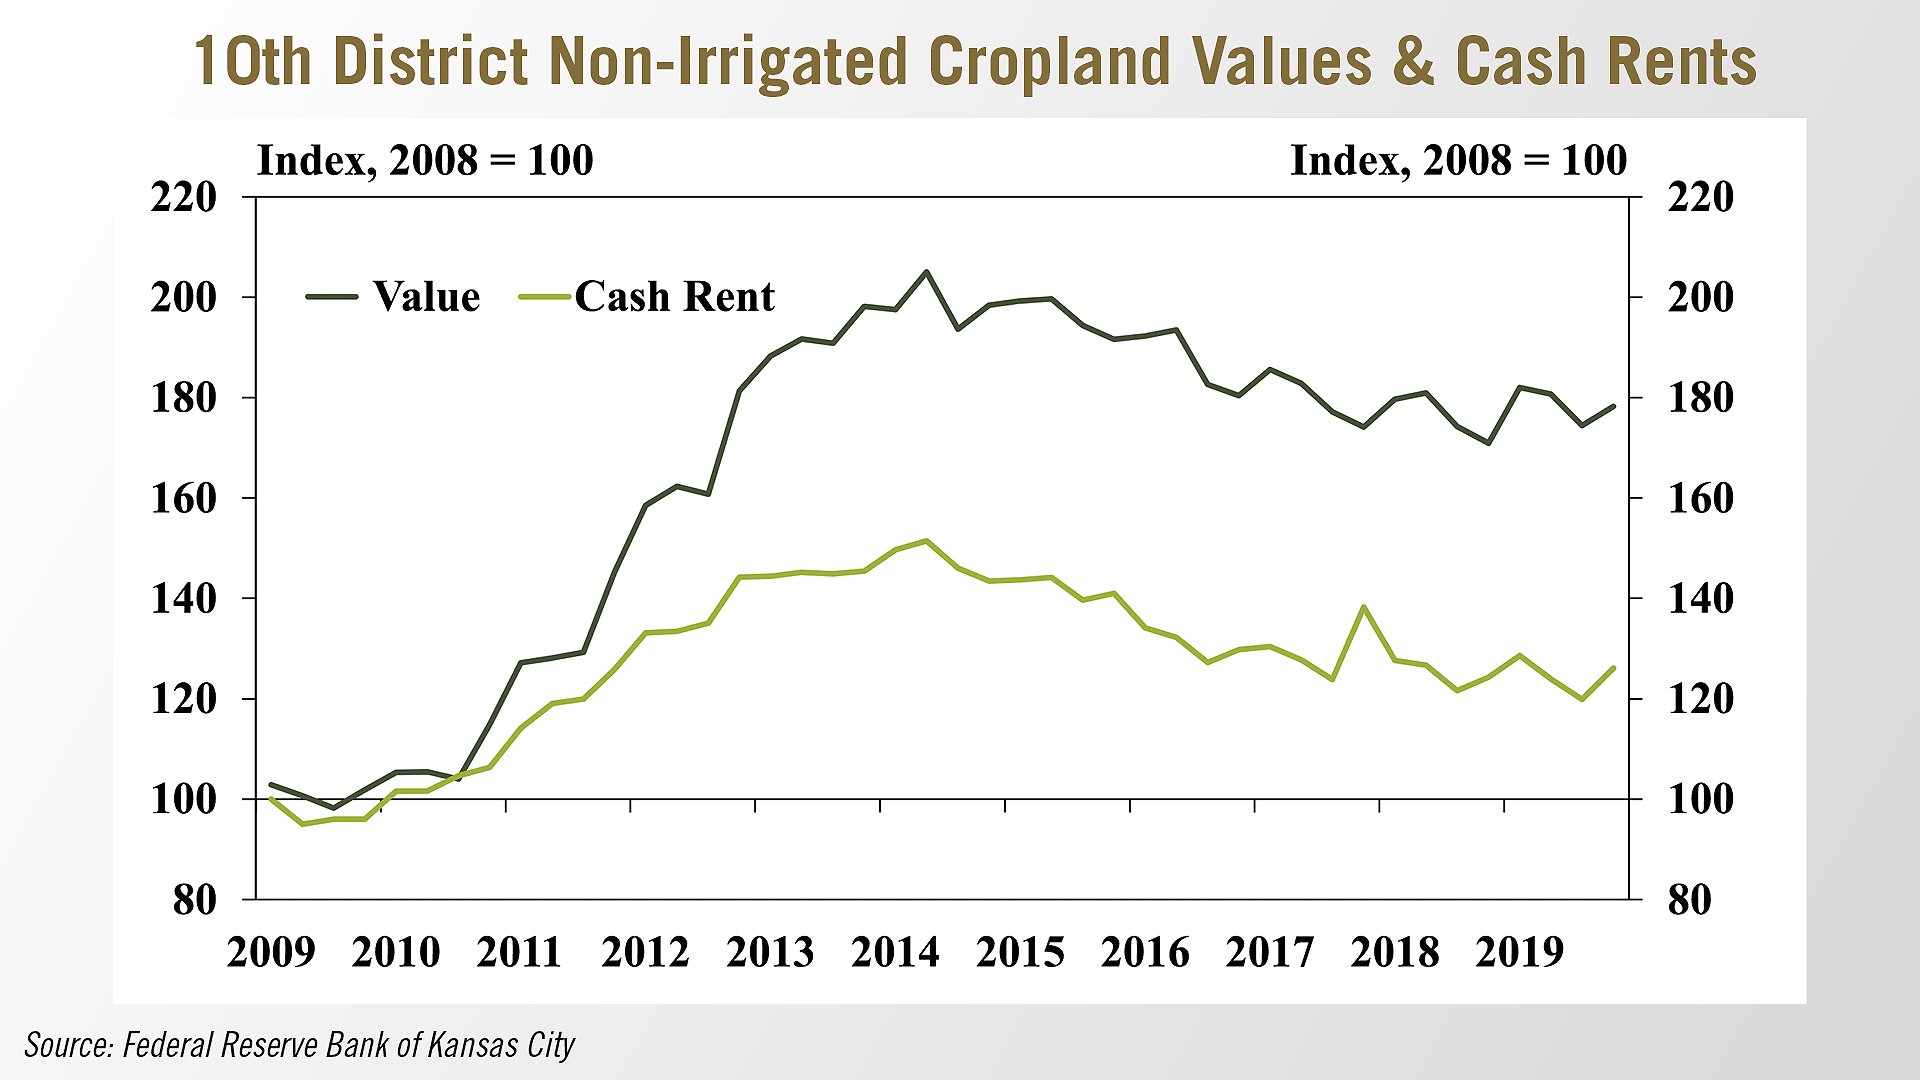 10th District Non-Irrigated Cropland Values & Cash Rents